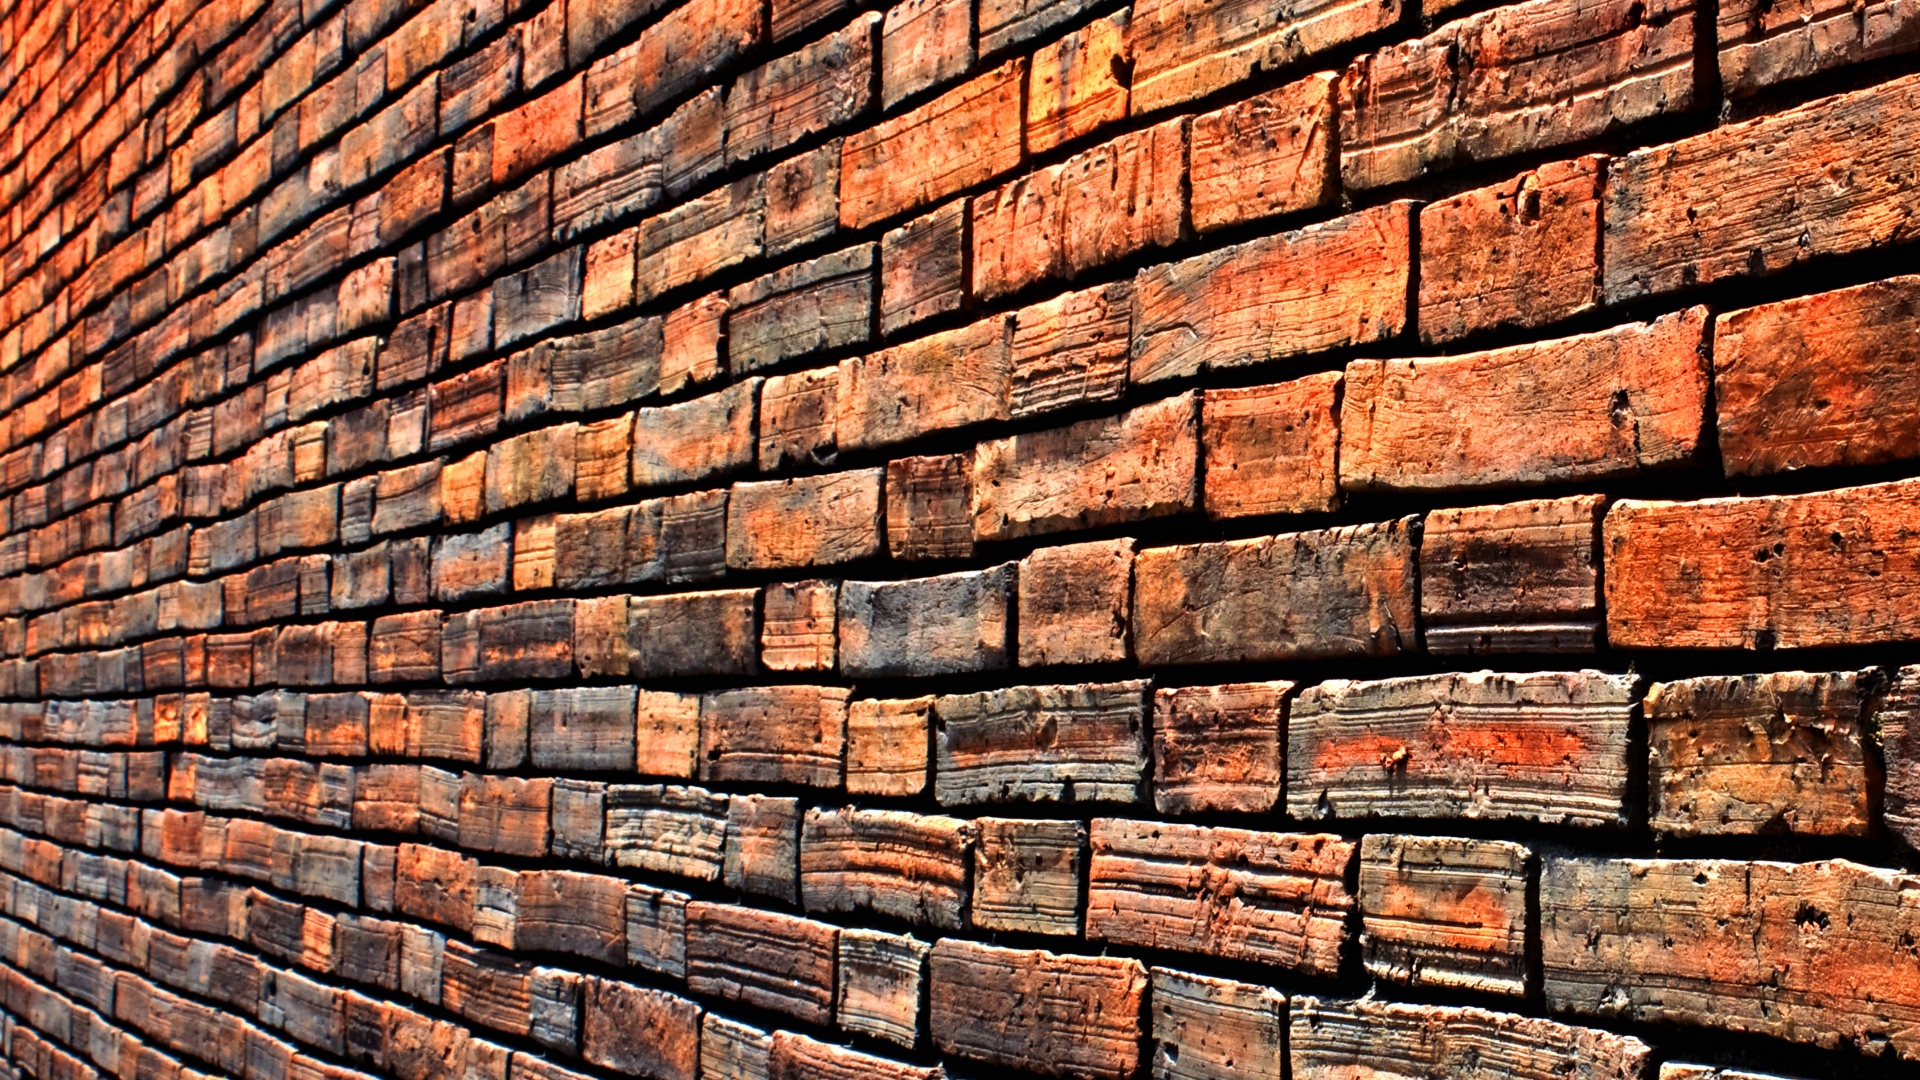 40 HD Brick Wallpapers Backgrounds For Free Download